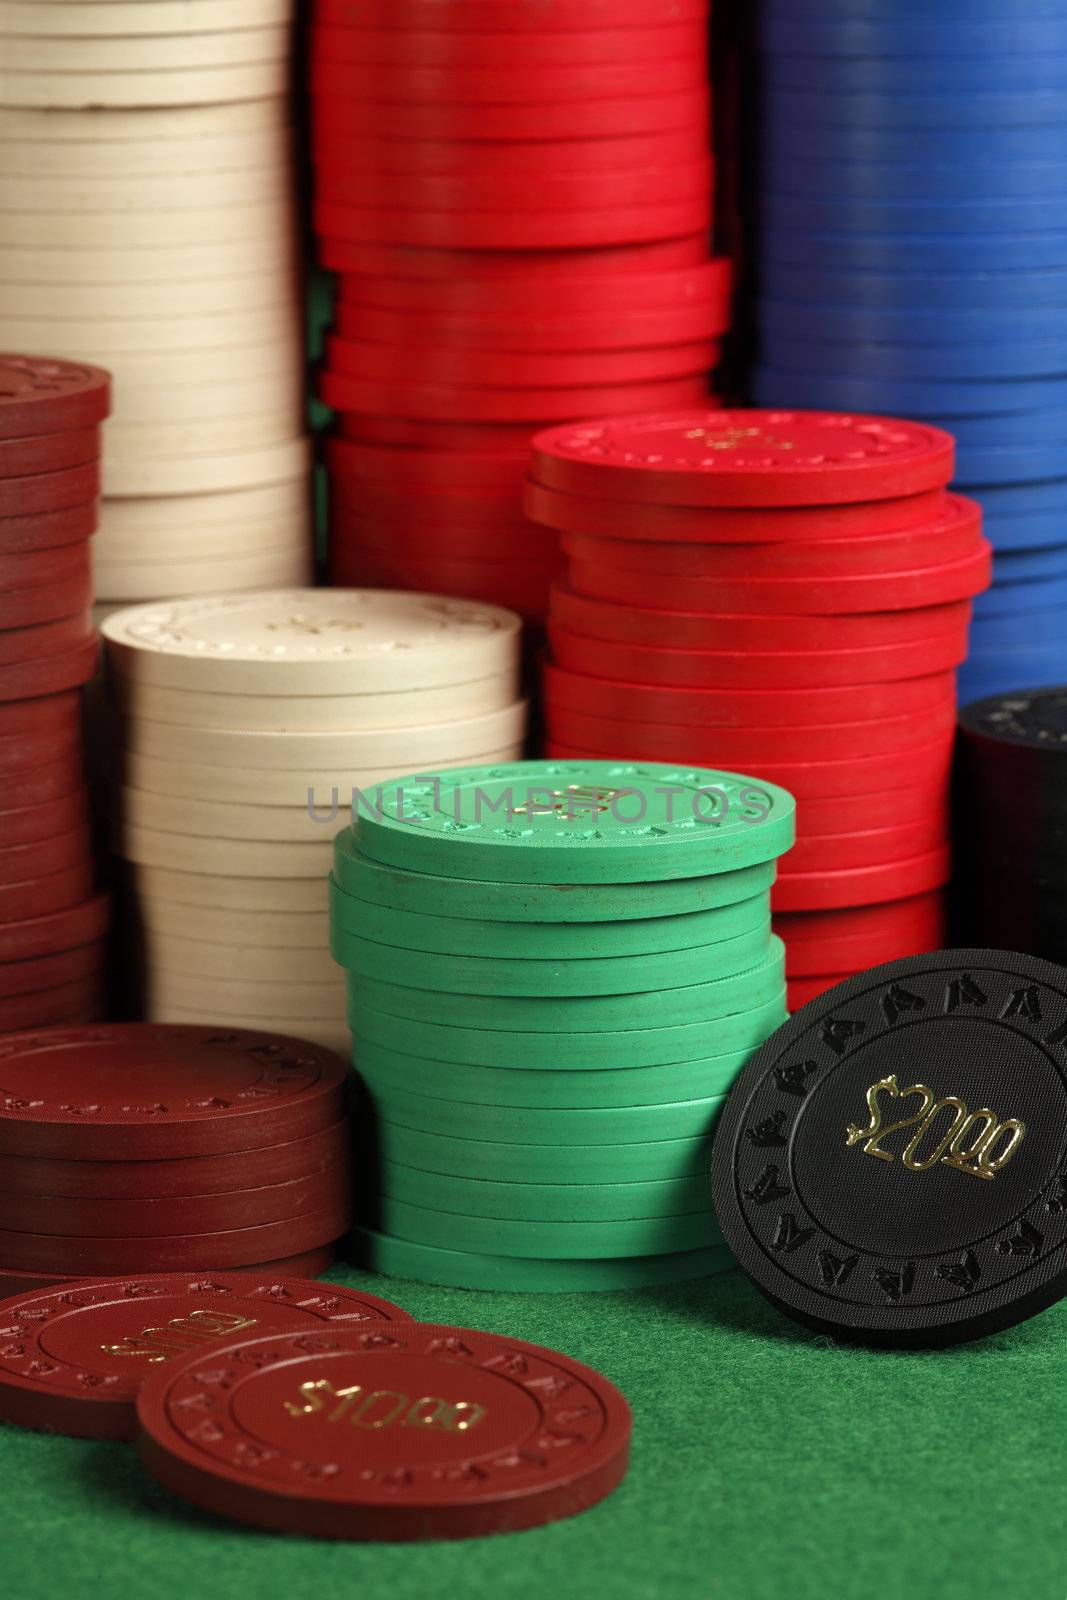 Stacks of antique poker chips by sumners